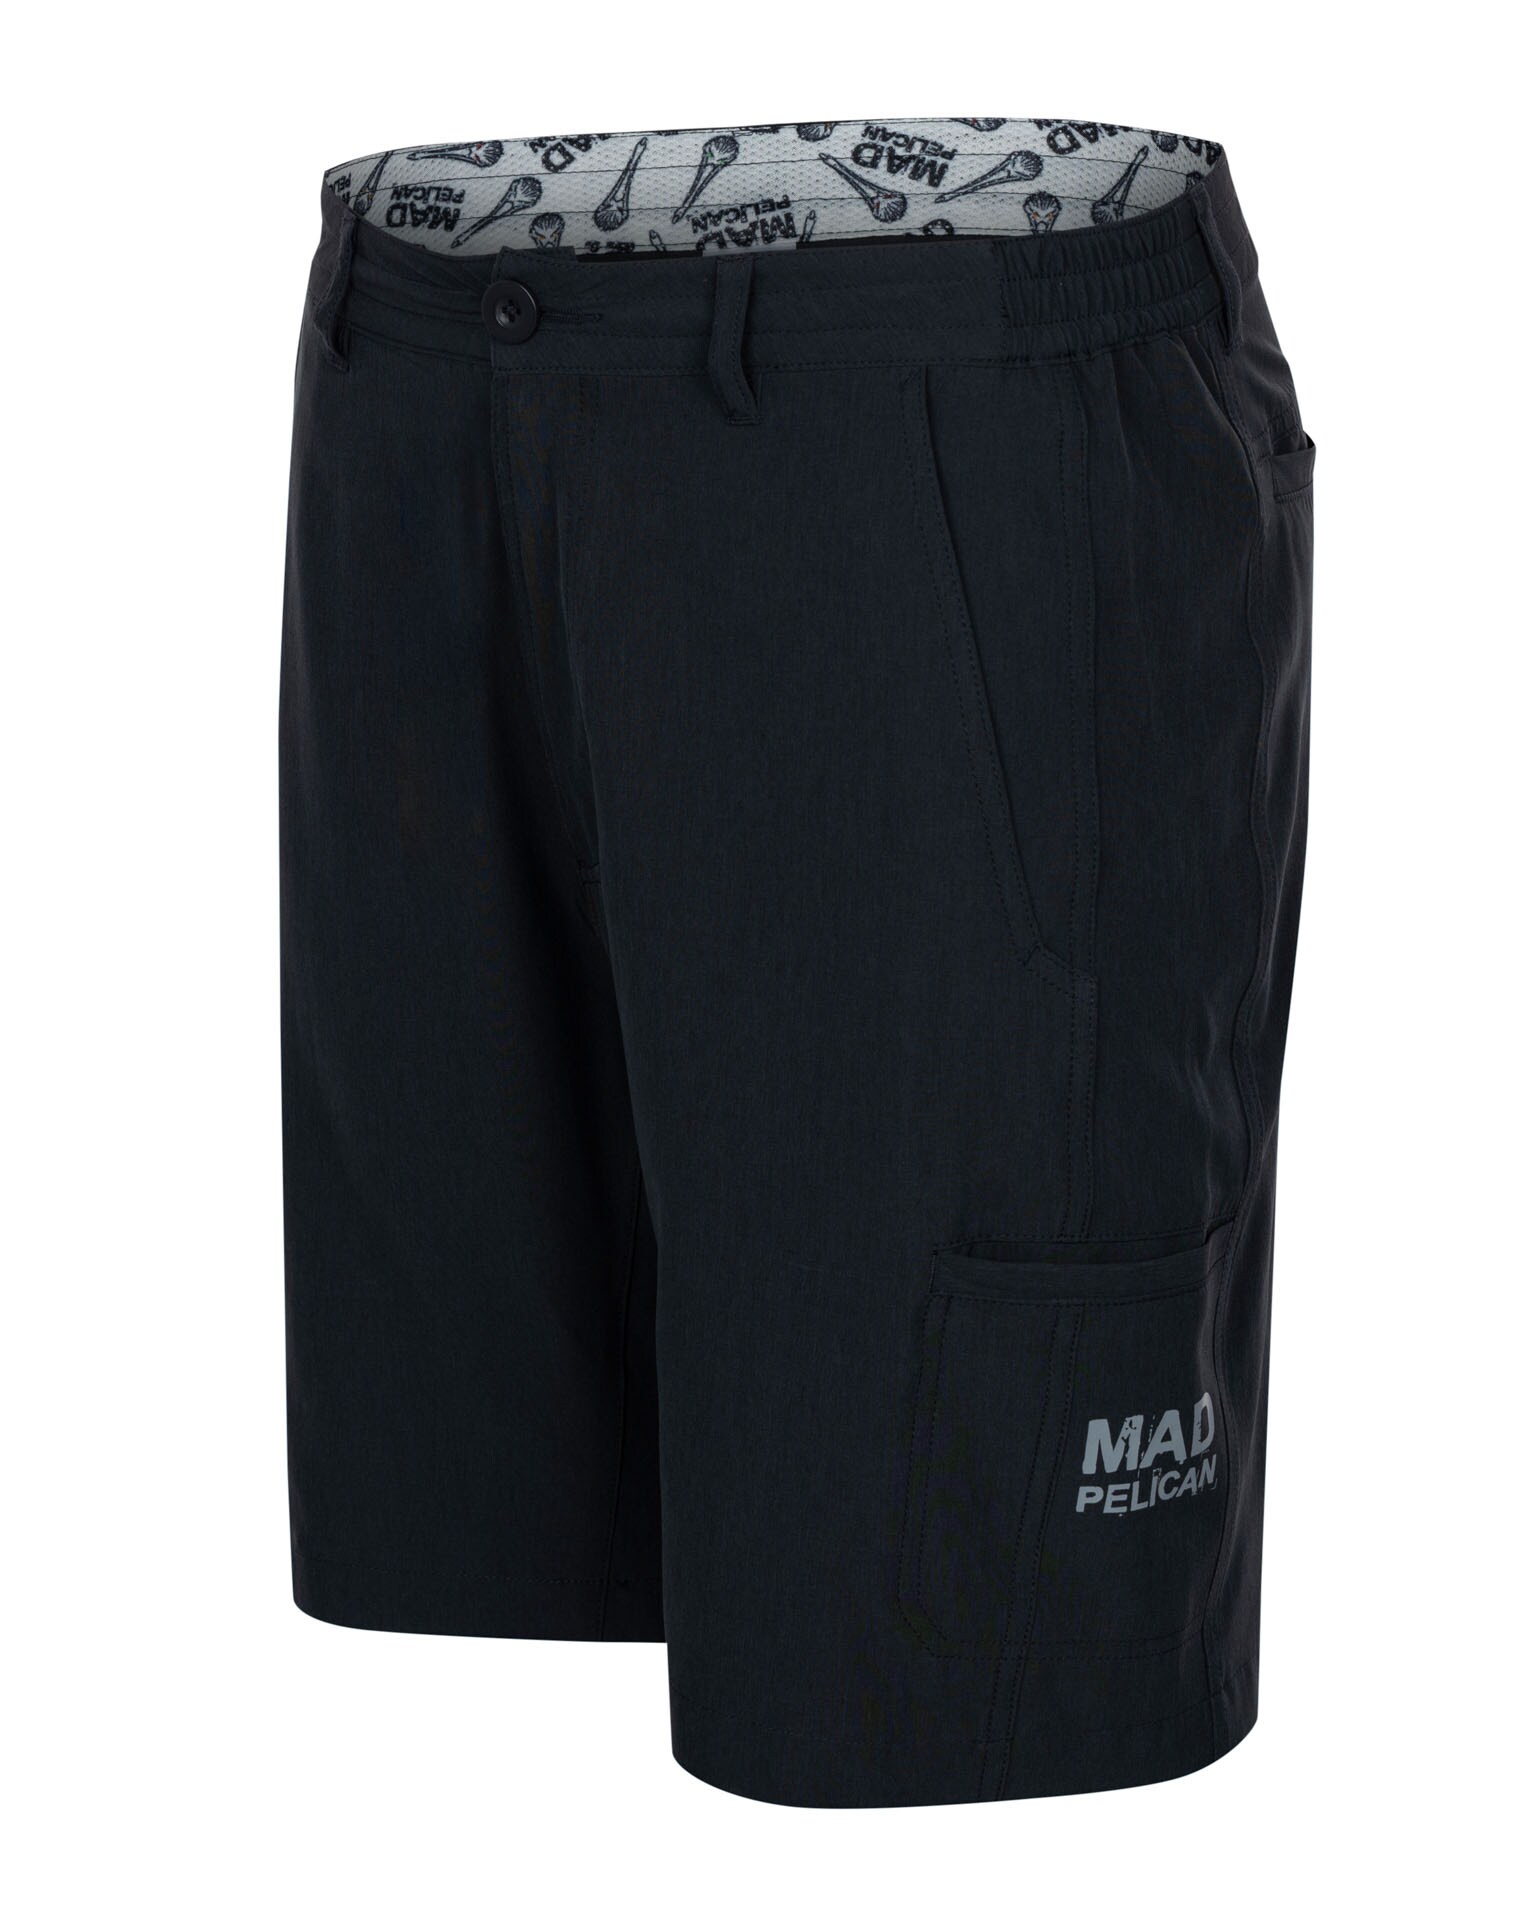 Mad Pelican Men's Anthracite Board Shorts (Xx-large) at Lowes.com